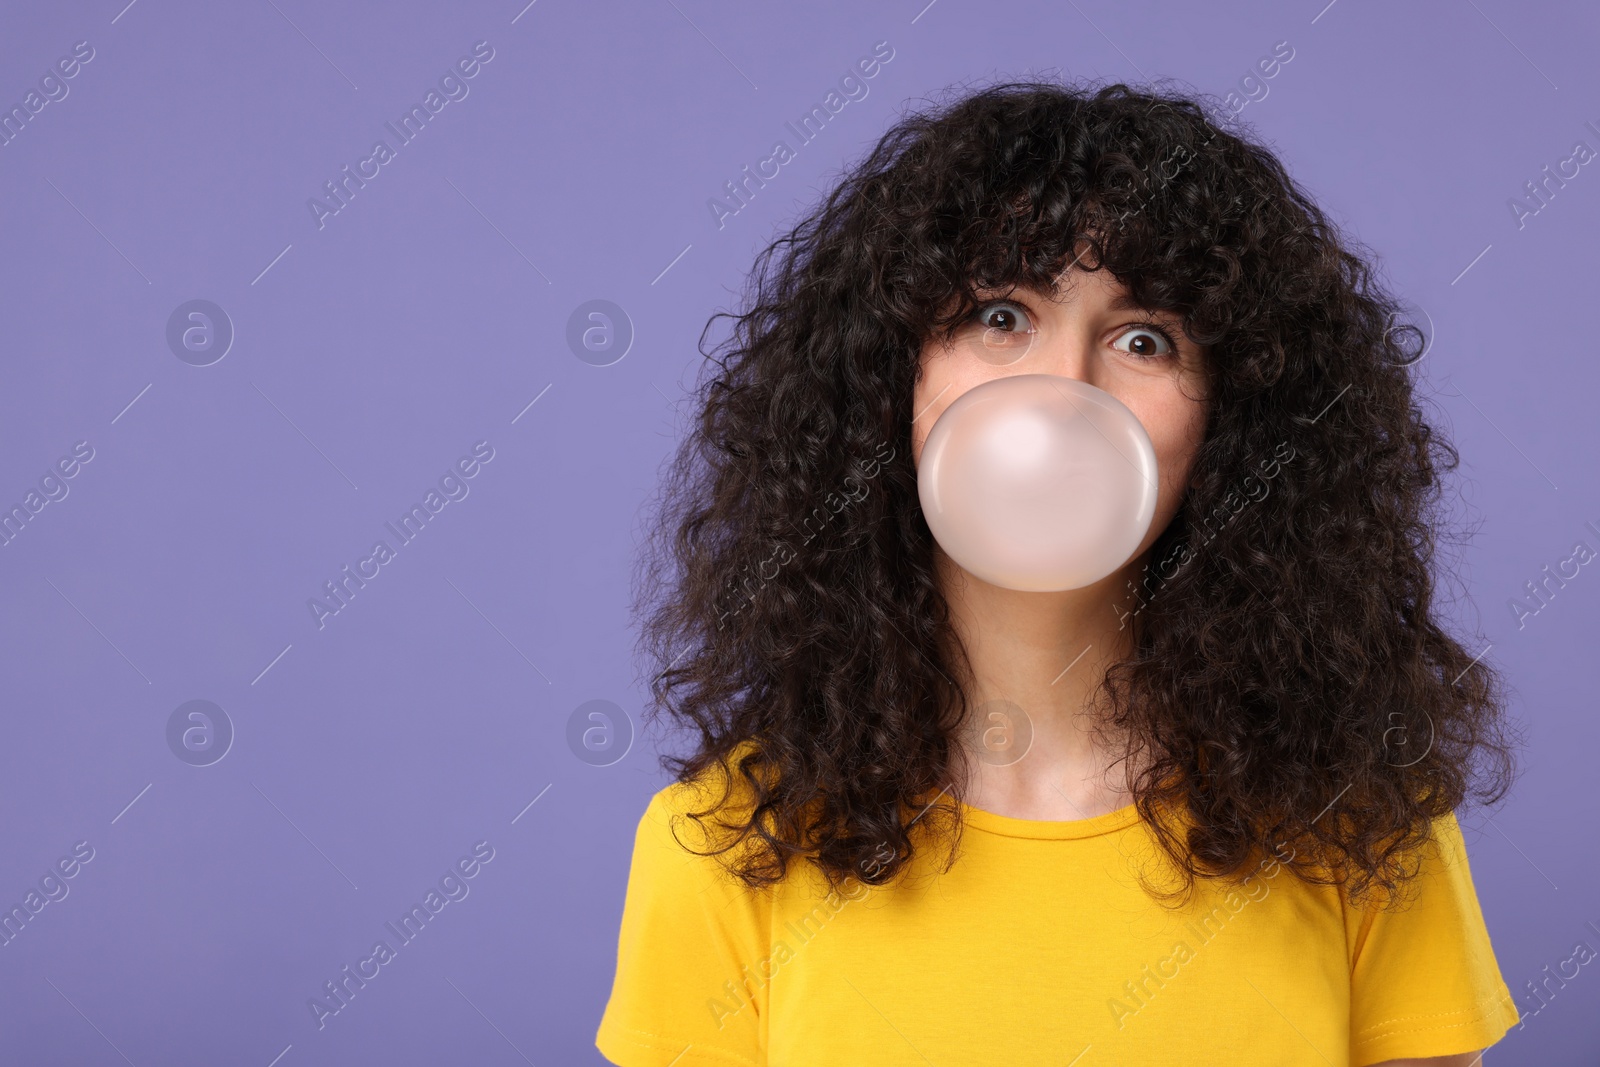 Photo of Beautiful young woman blowing bubble gum on purple background. Space for text